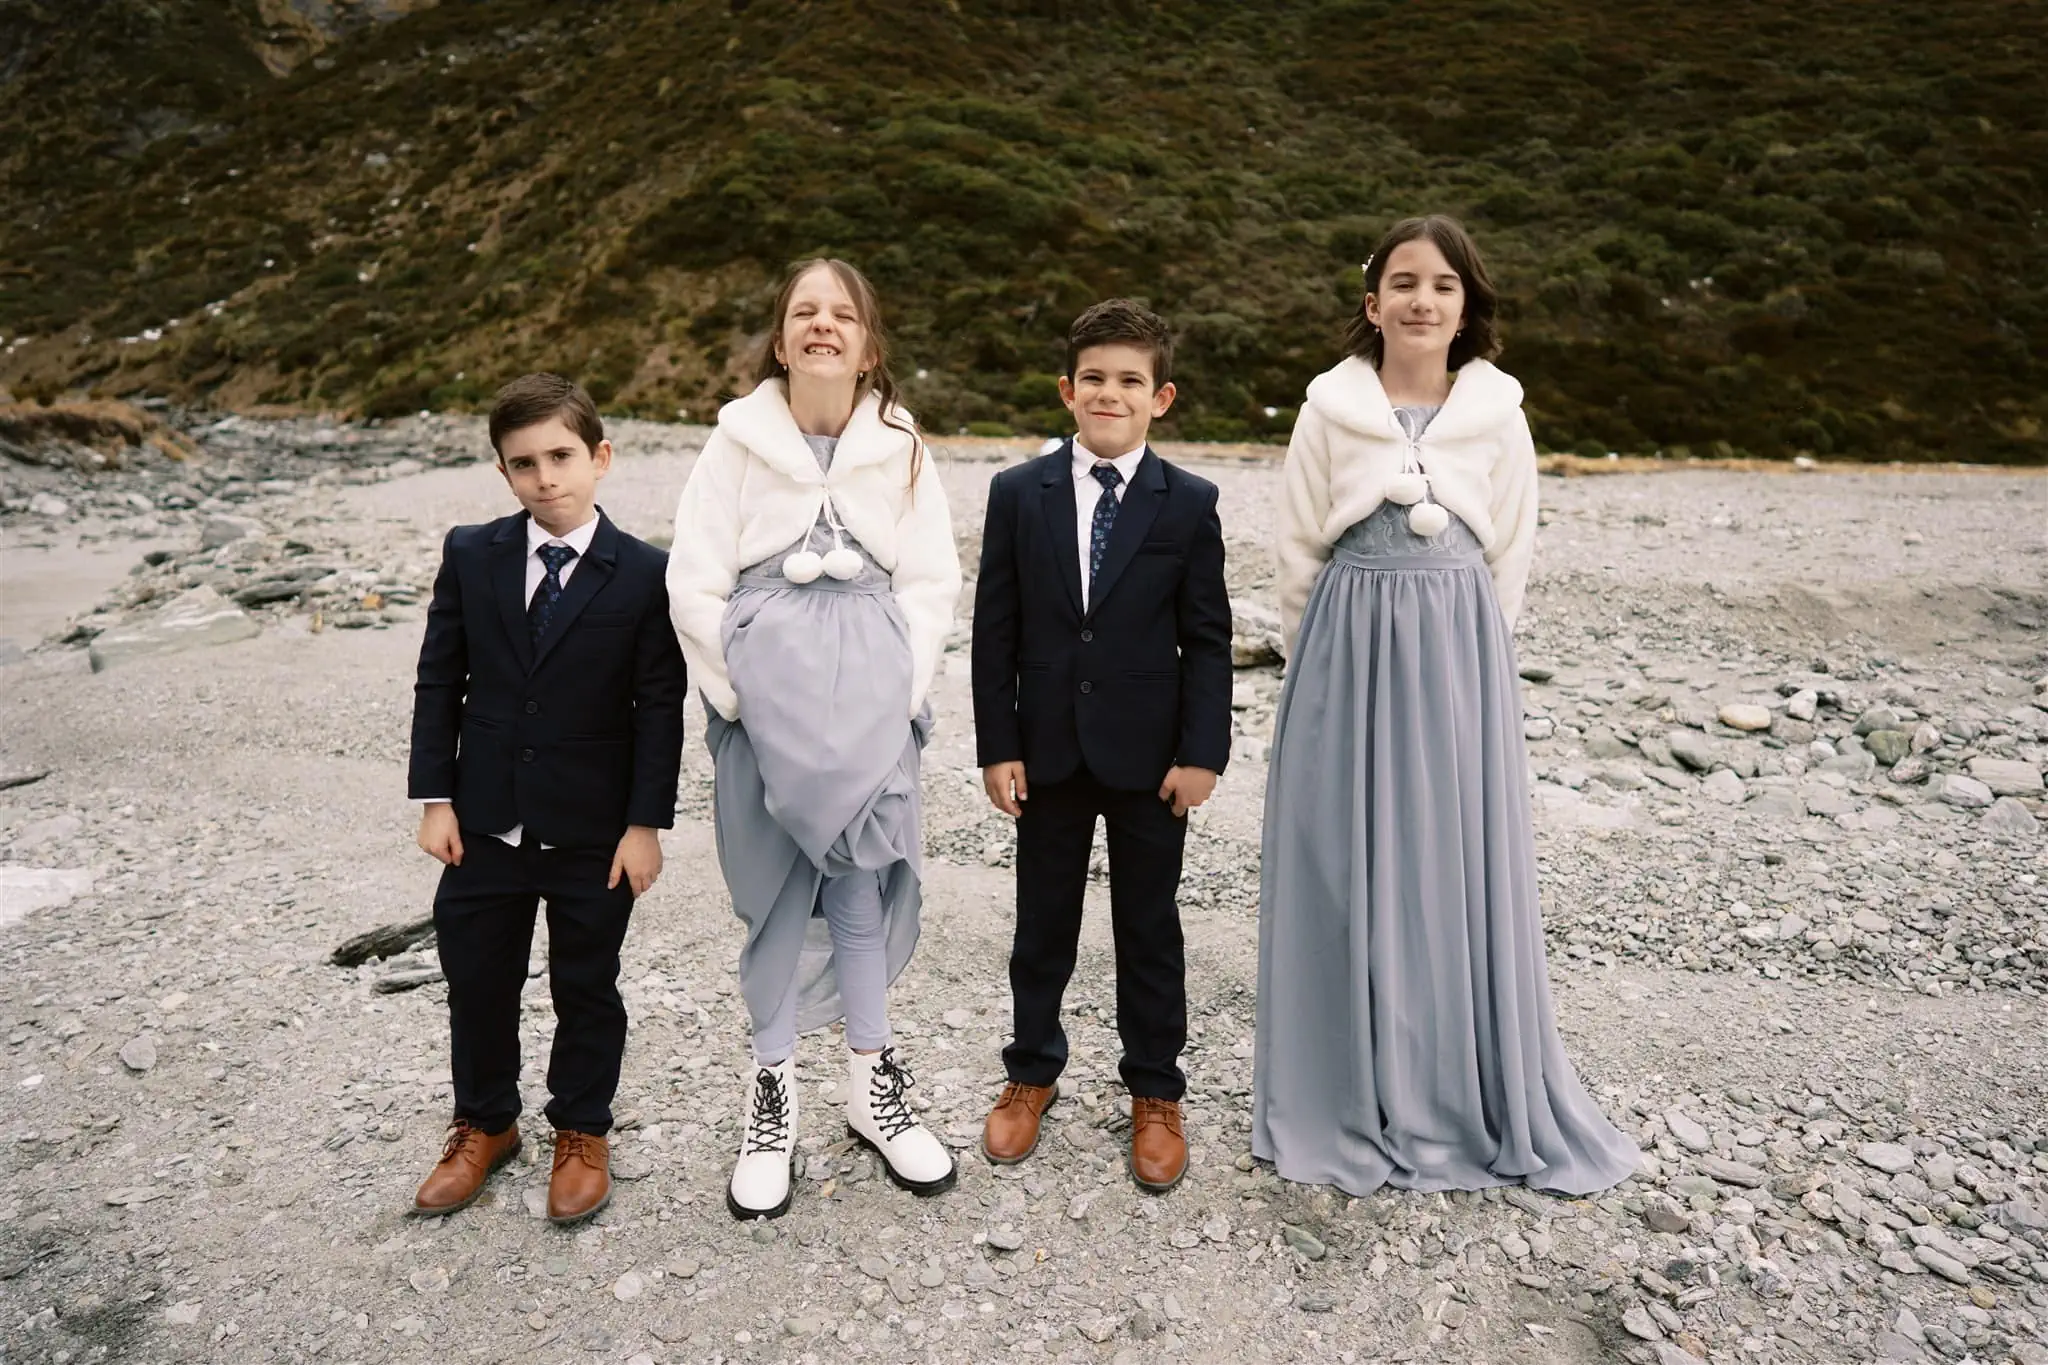 Queenstown New Zealand Elopement Wedding Photographer - Shahar and Alex, two children in formal attire, posing for a photo.